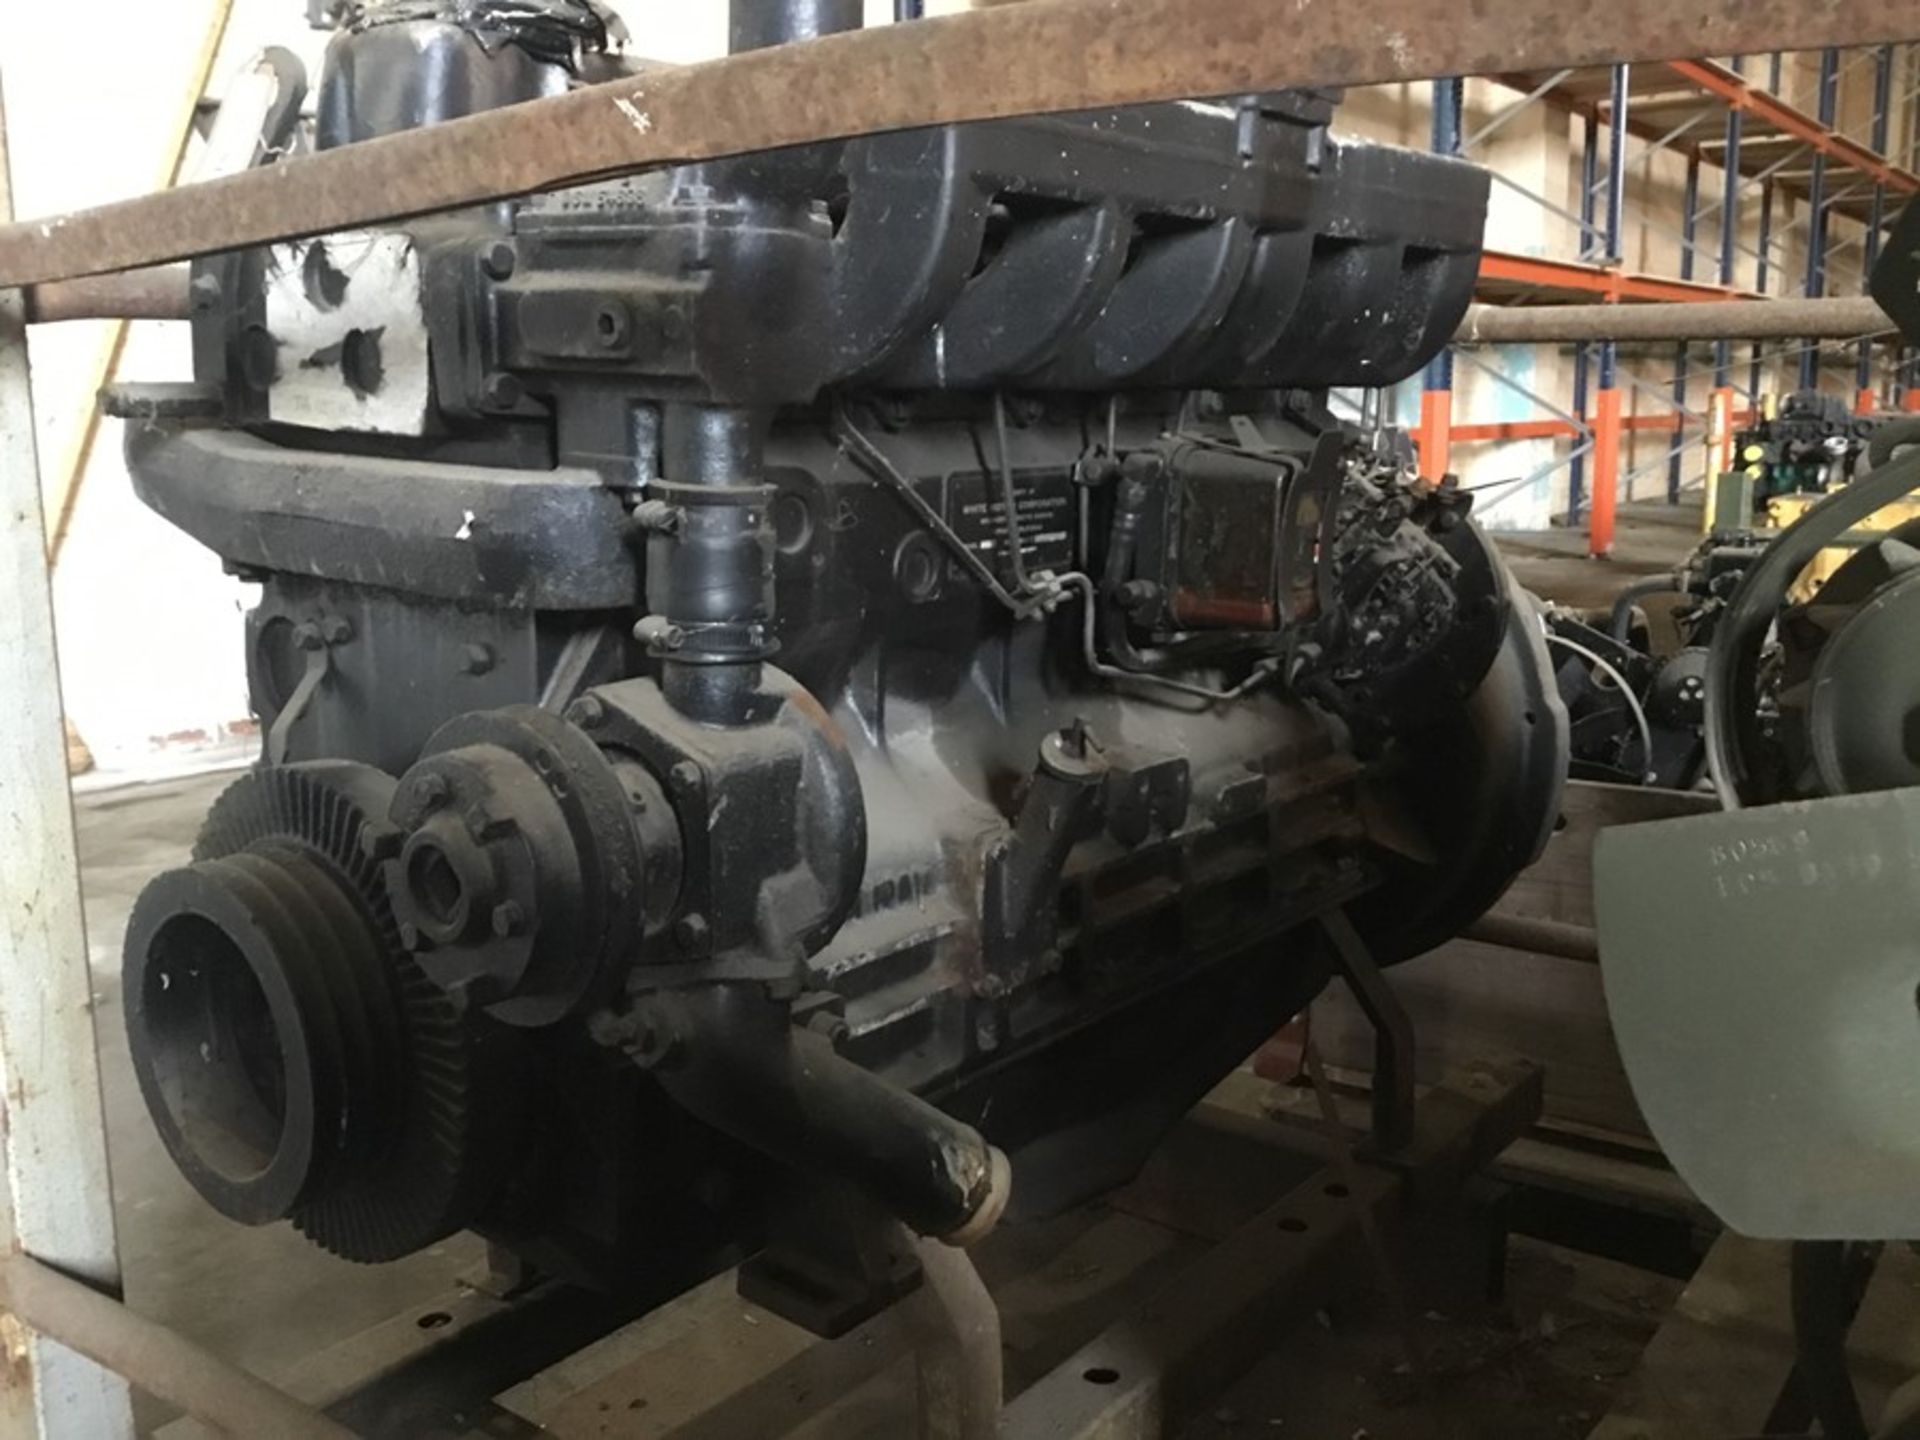 Diesel engine: Whites Motor company D4300 6cyl Non turbo Serial 4300-01 - Image 16 of 21